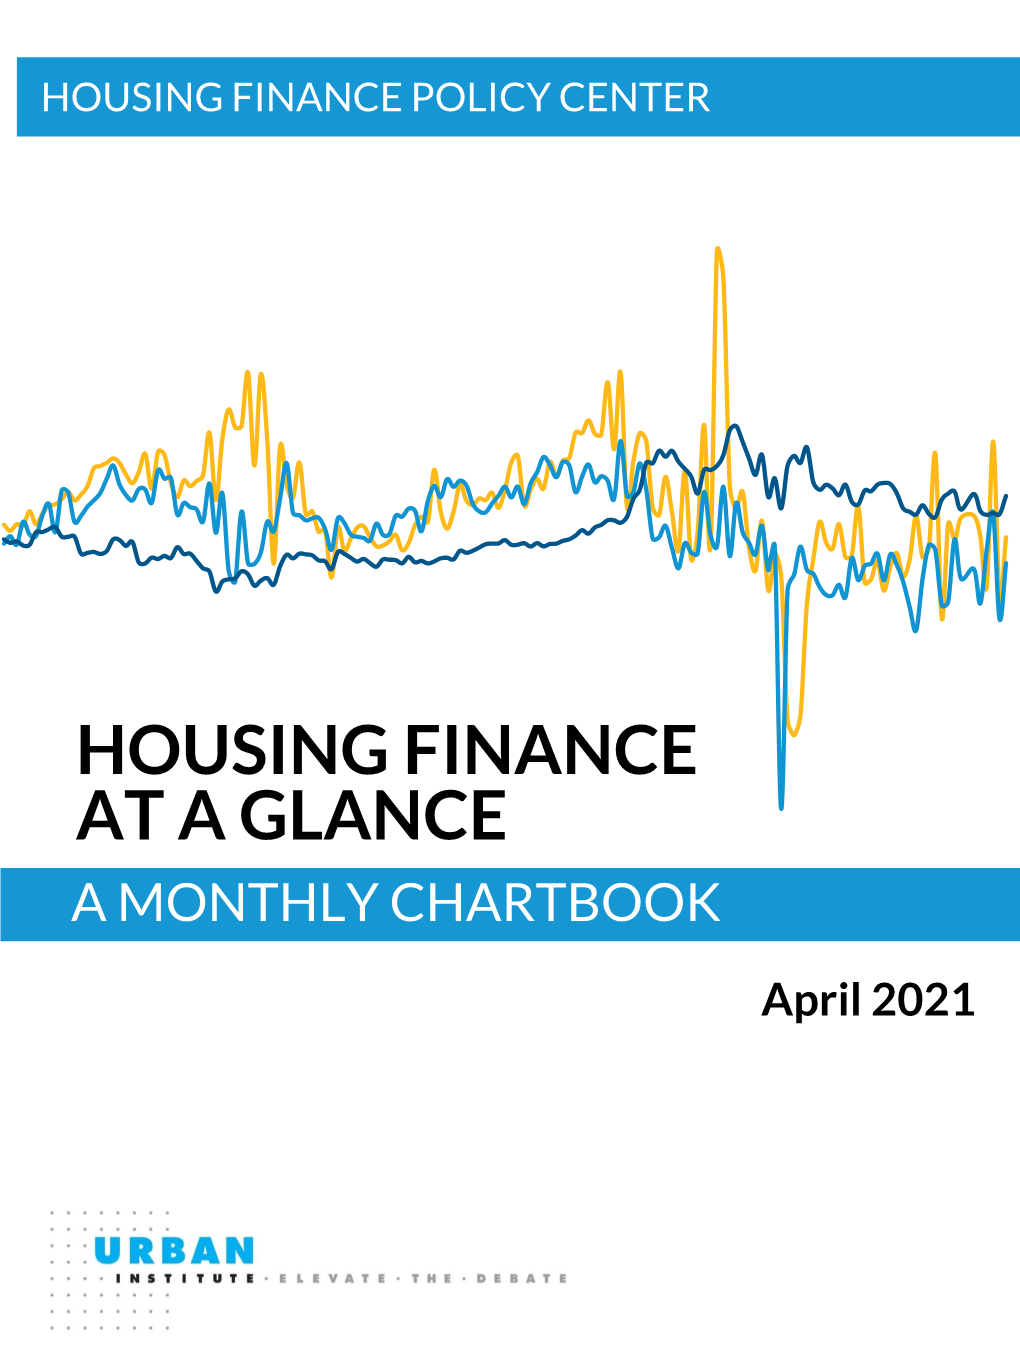 Housing Finance at a Glance: a Monthly Chartbook, April 2021